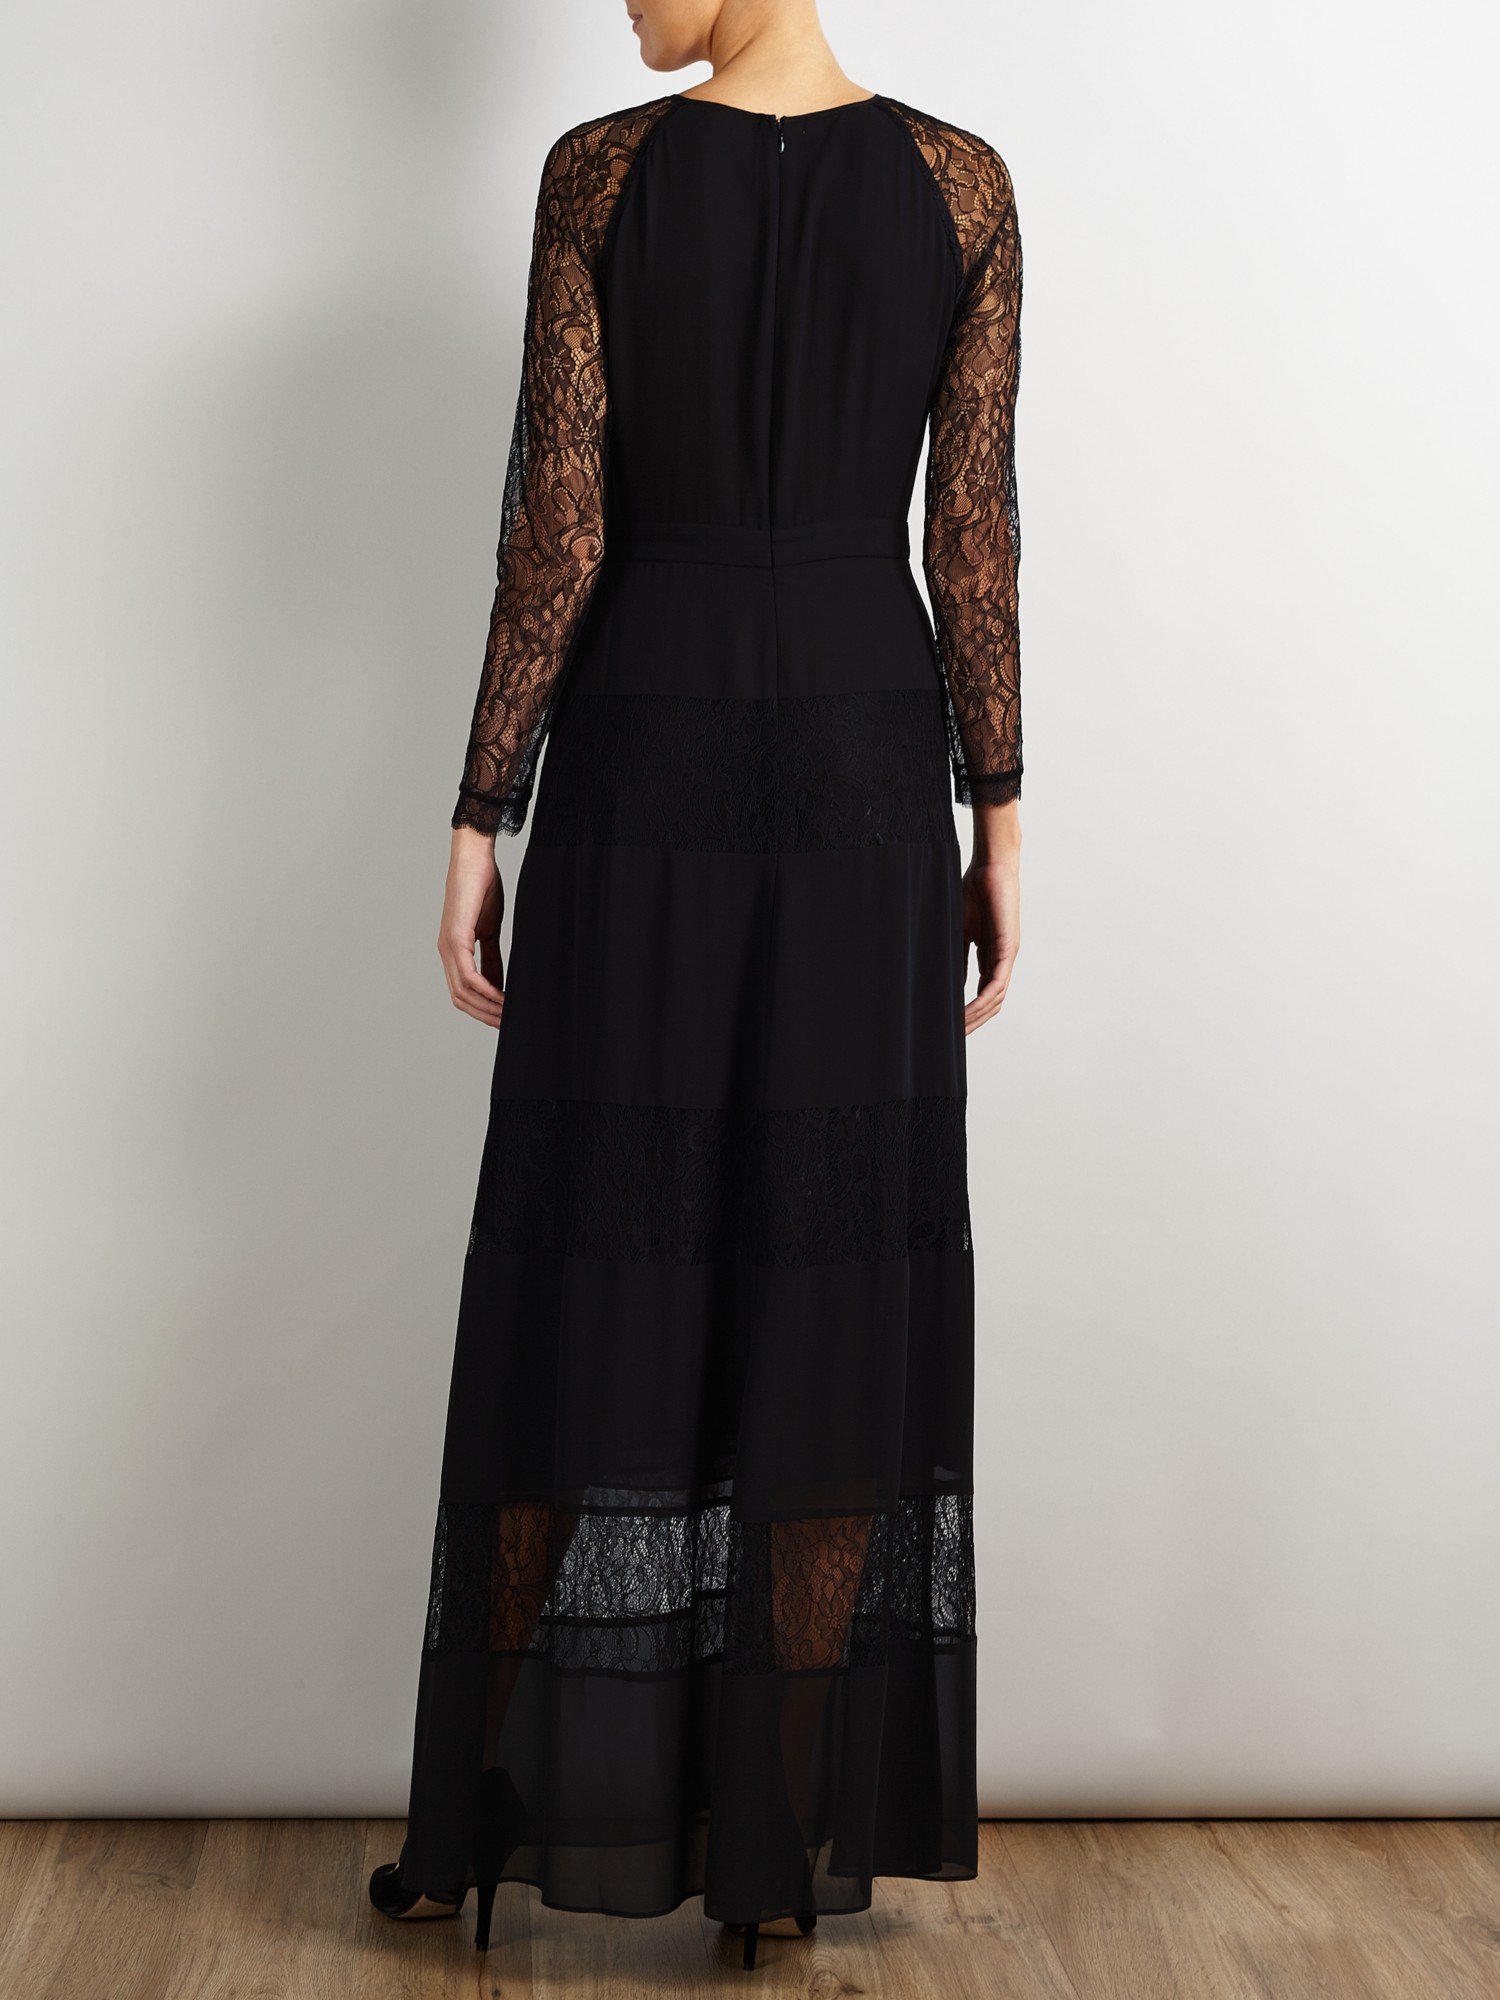 Somerset by alice temperley Lace Maxi Dress in Black | Lyst